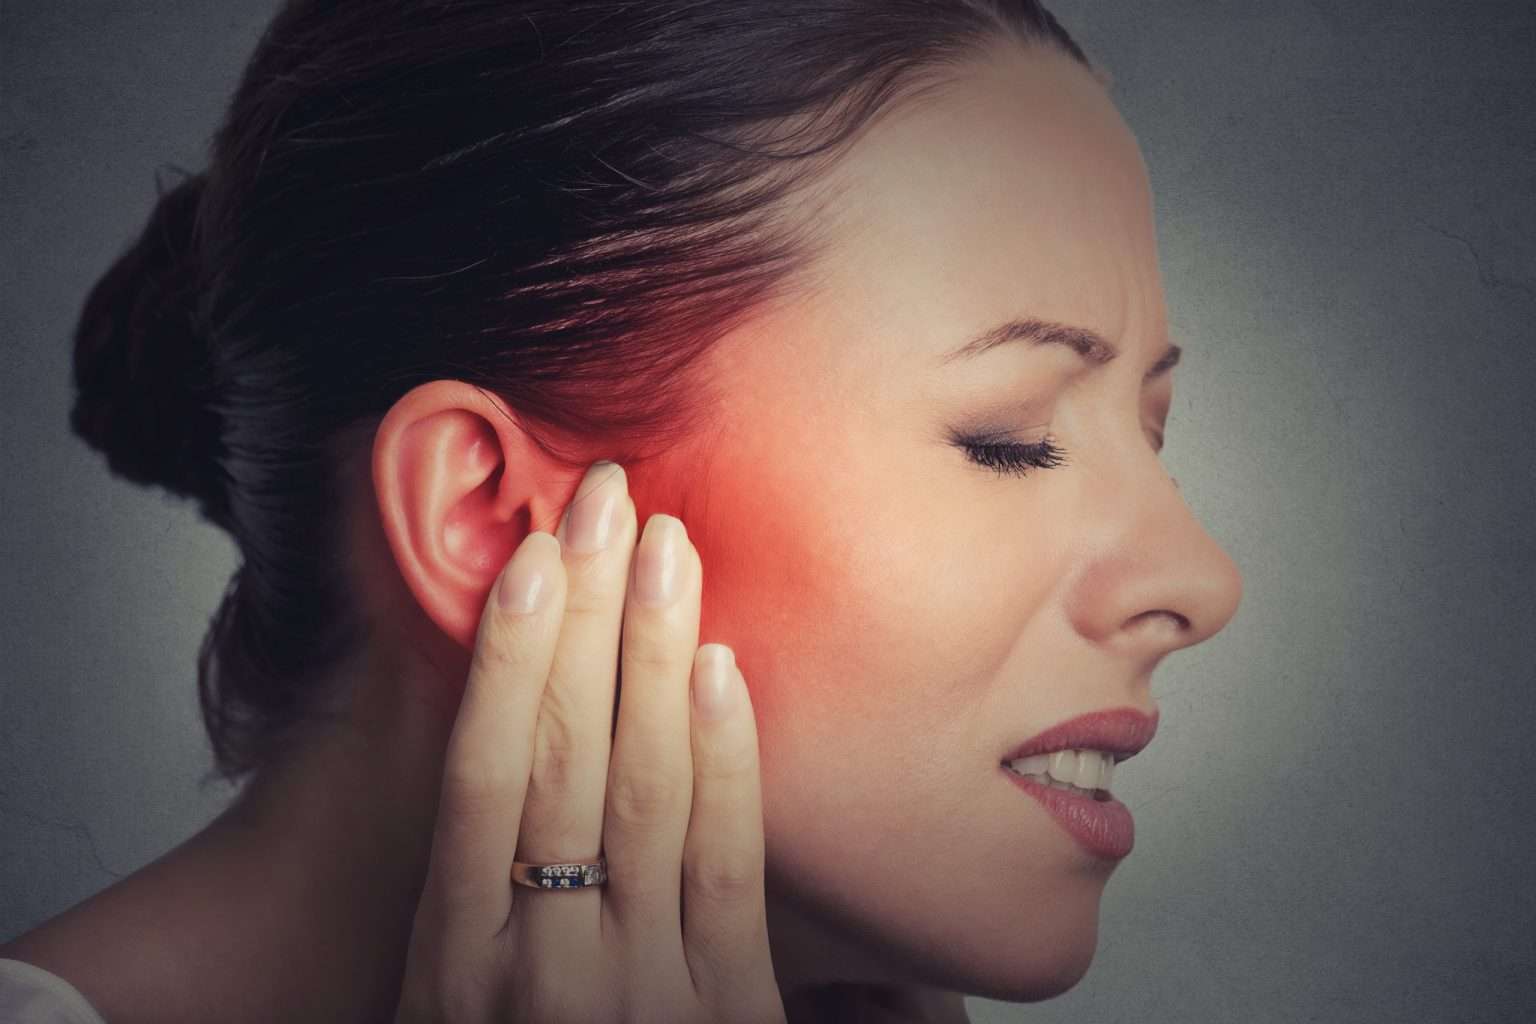 When Should I See a Doctor About an Ear Infection ...